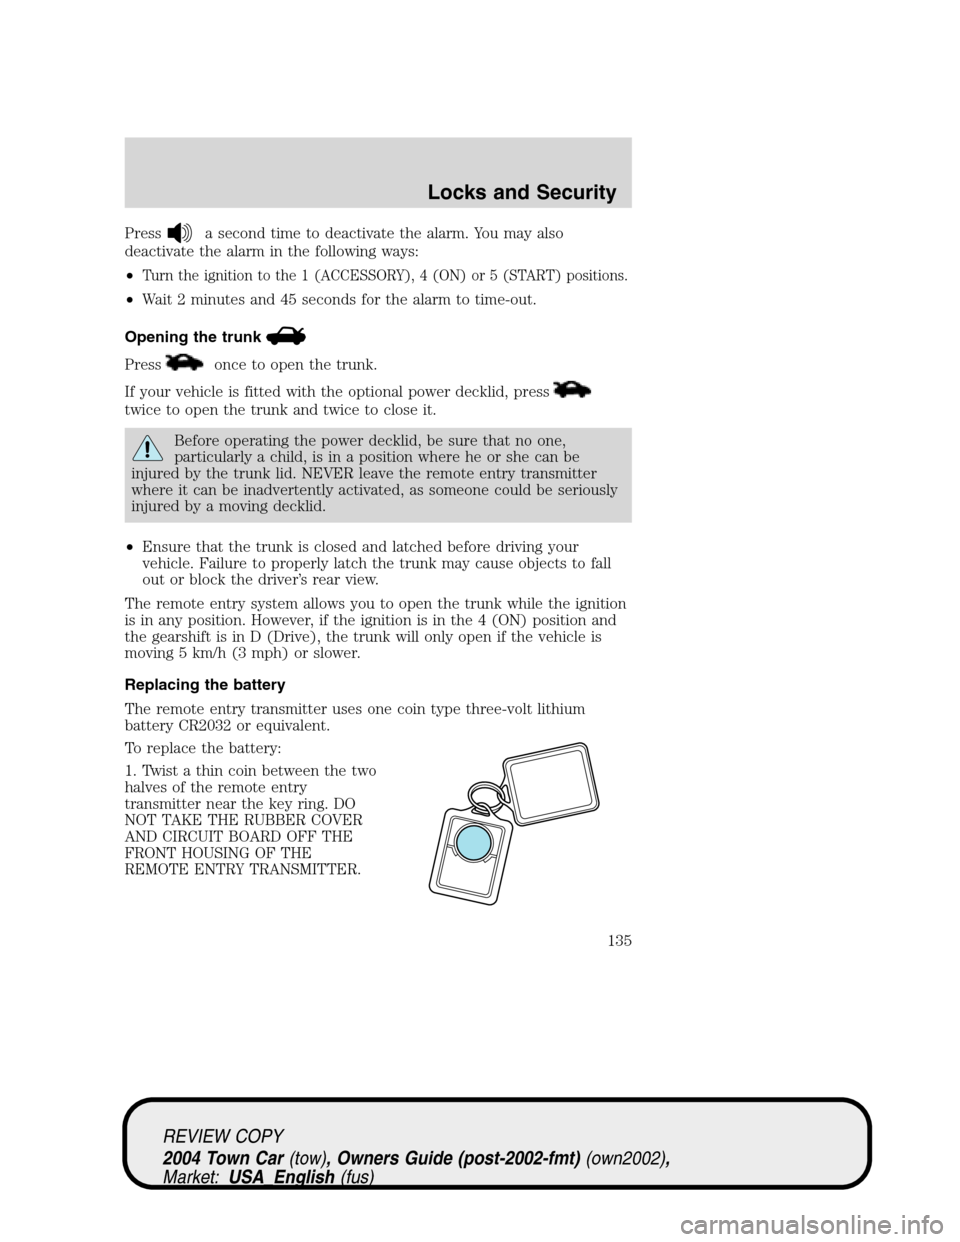 LINCOLN TOWN CAR 2004  Owners Manual Pressa second time to deactivate the alarm. You may also
deactivate the alarm in the following ways:
•
Turn the ignition to the 1 (ACCESSORY), 4 (ON) or 5 (START) positions.
•Wait 2 minutes and 45